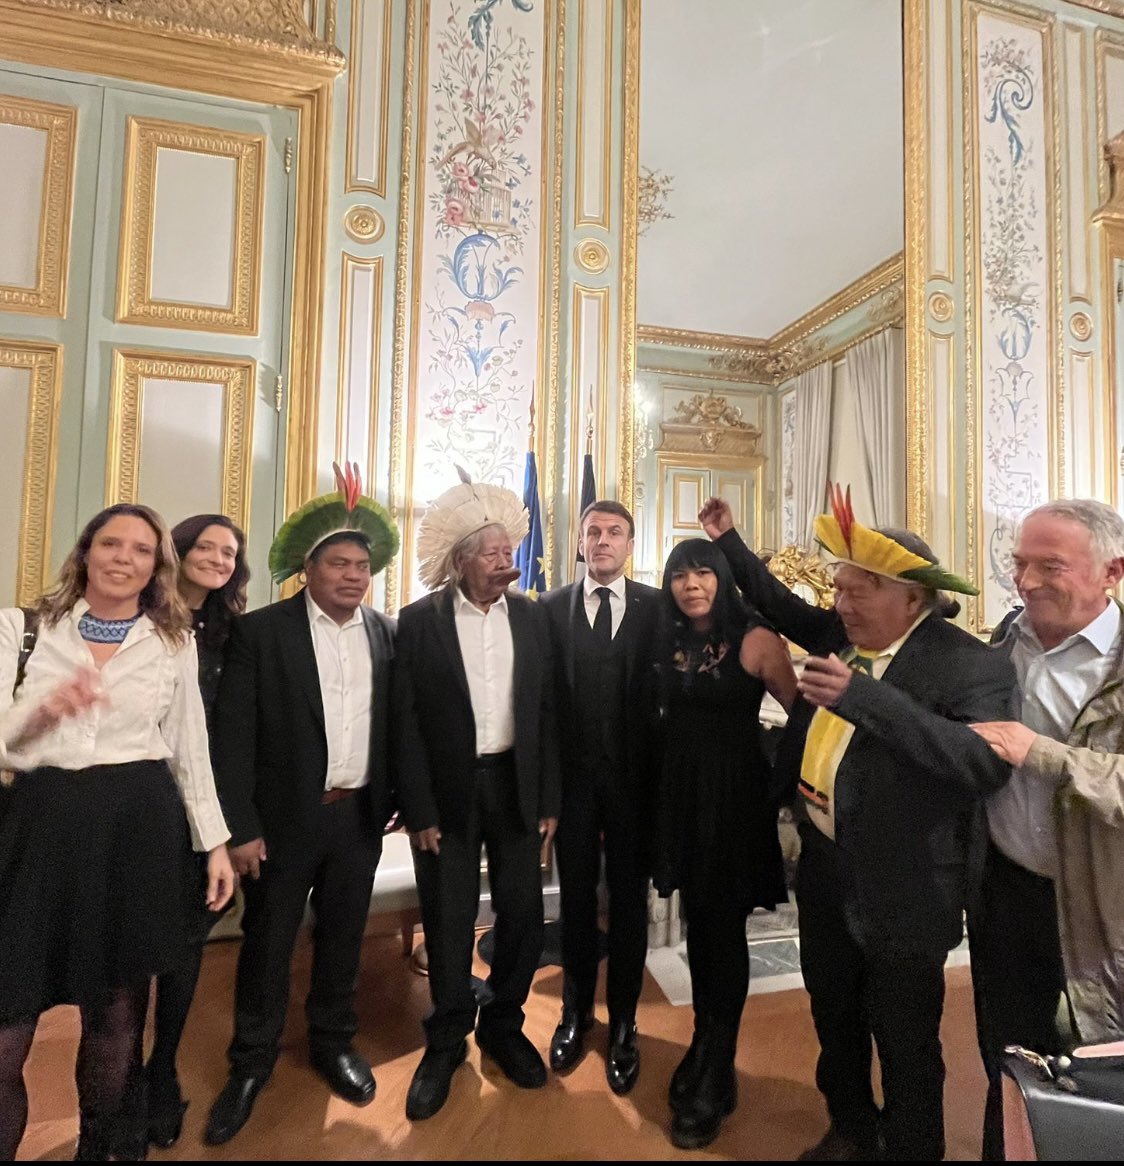 So honored to accompany Cacique Raoni and @EmmanuelMacron in their efforts for the preservation of the Amazonian rainforests. A memorable evening dedicated to the protection of our planet's lungs and the support of indigenous leadership. #RainforestPreservation #AFV  #ActOnClimat